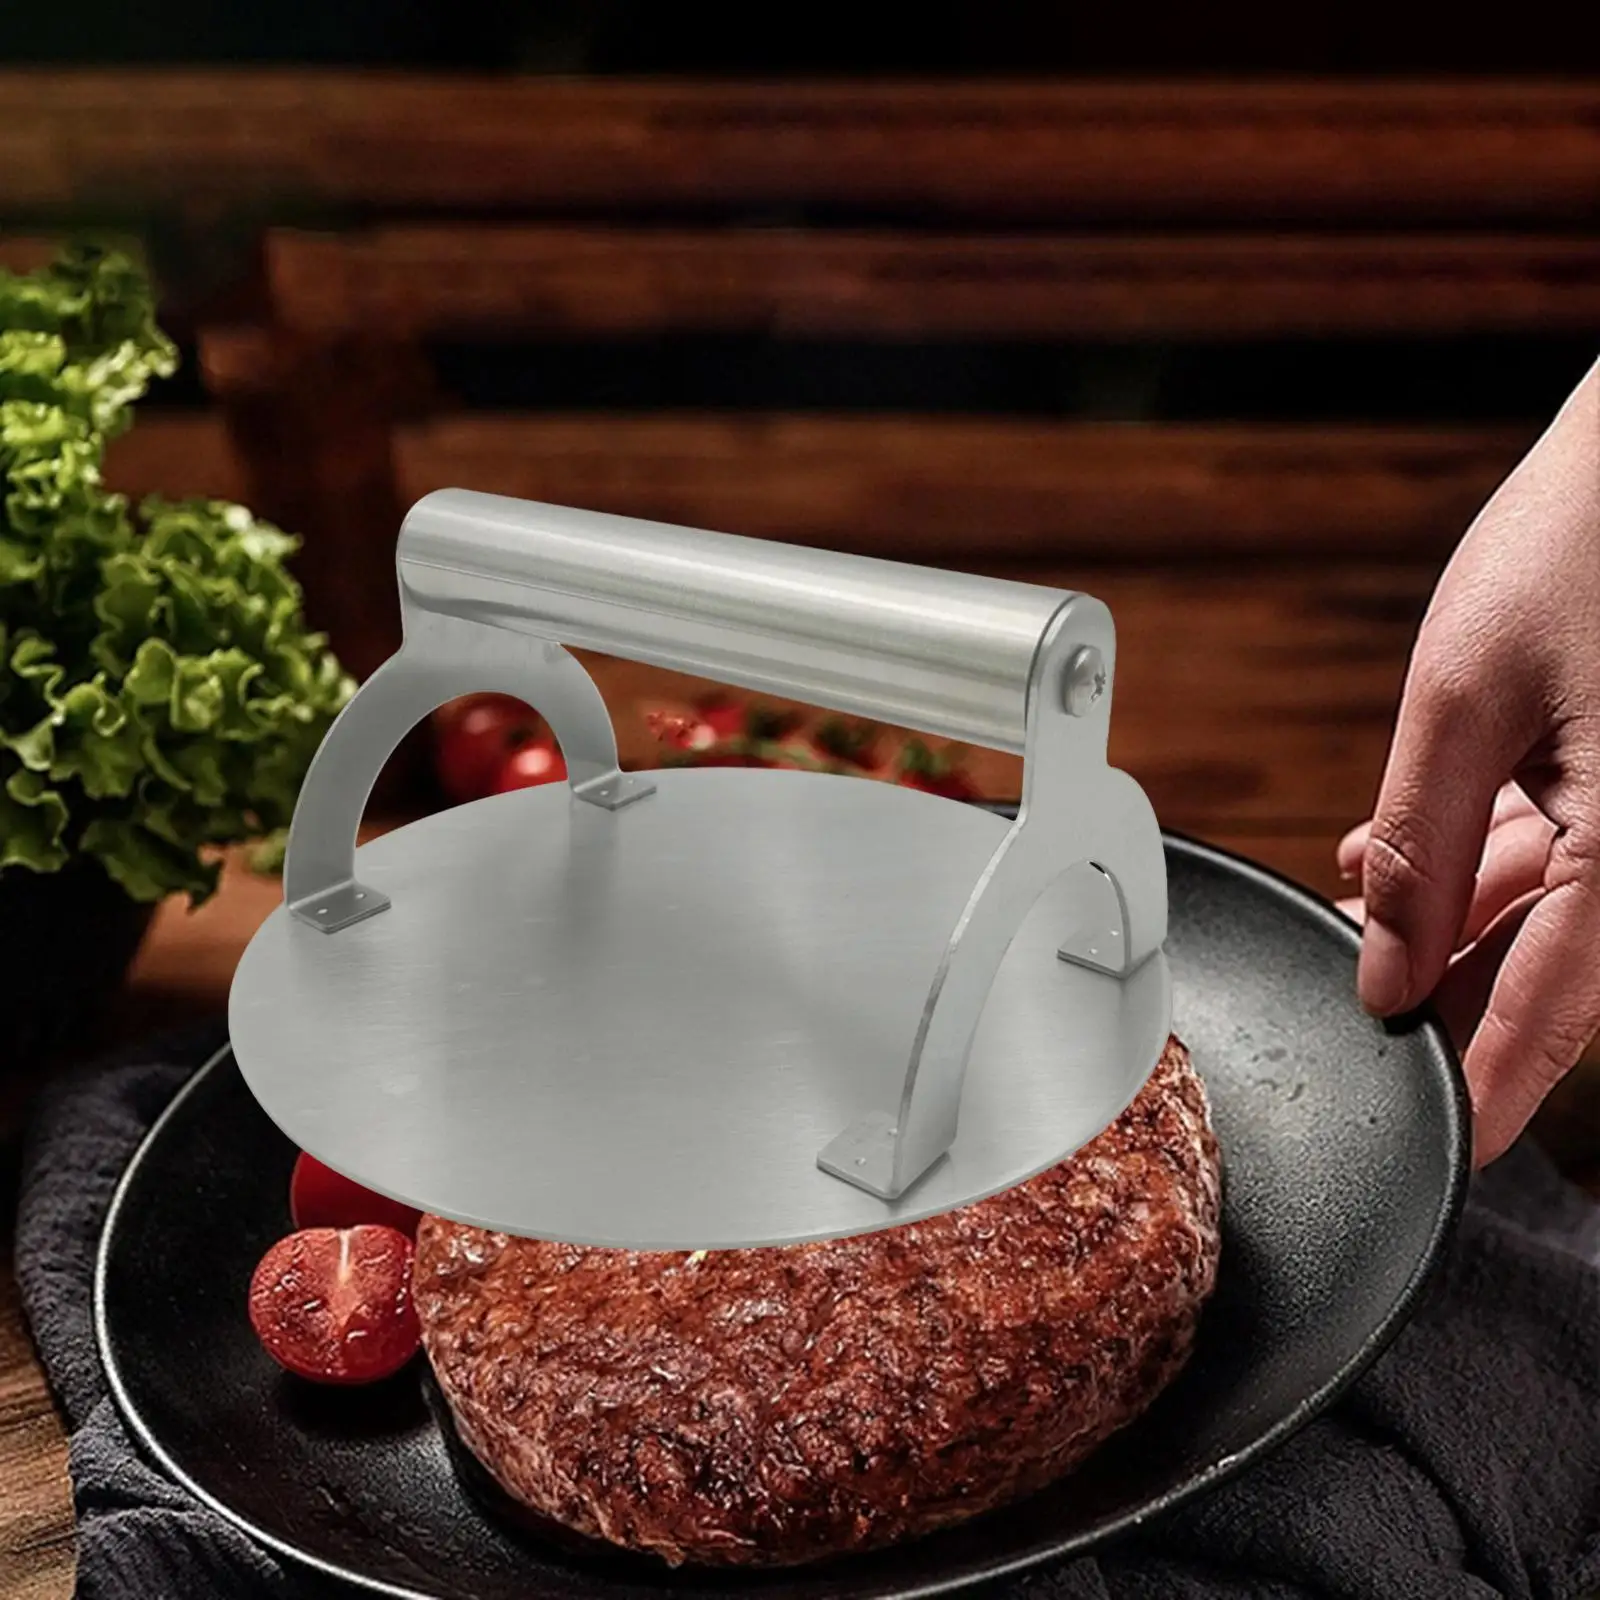 Stainless Steel Burger Press Kitchen Accessories Nonstick Grill Press Meat Beef Burger for Home Restaurant Cooking Barbecue Beef